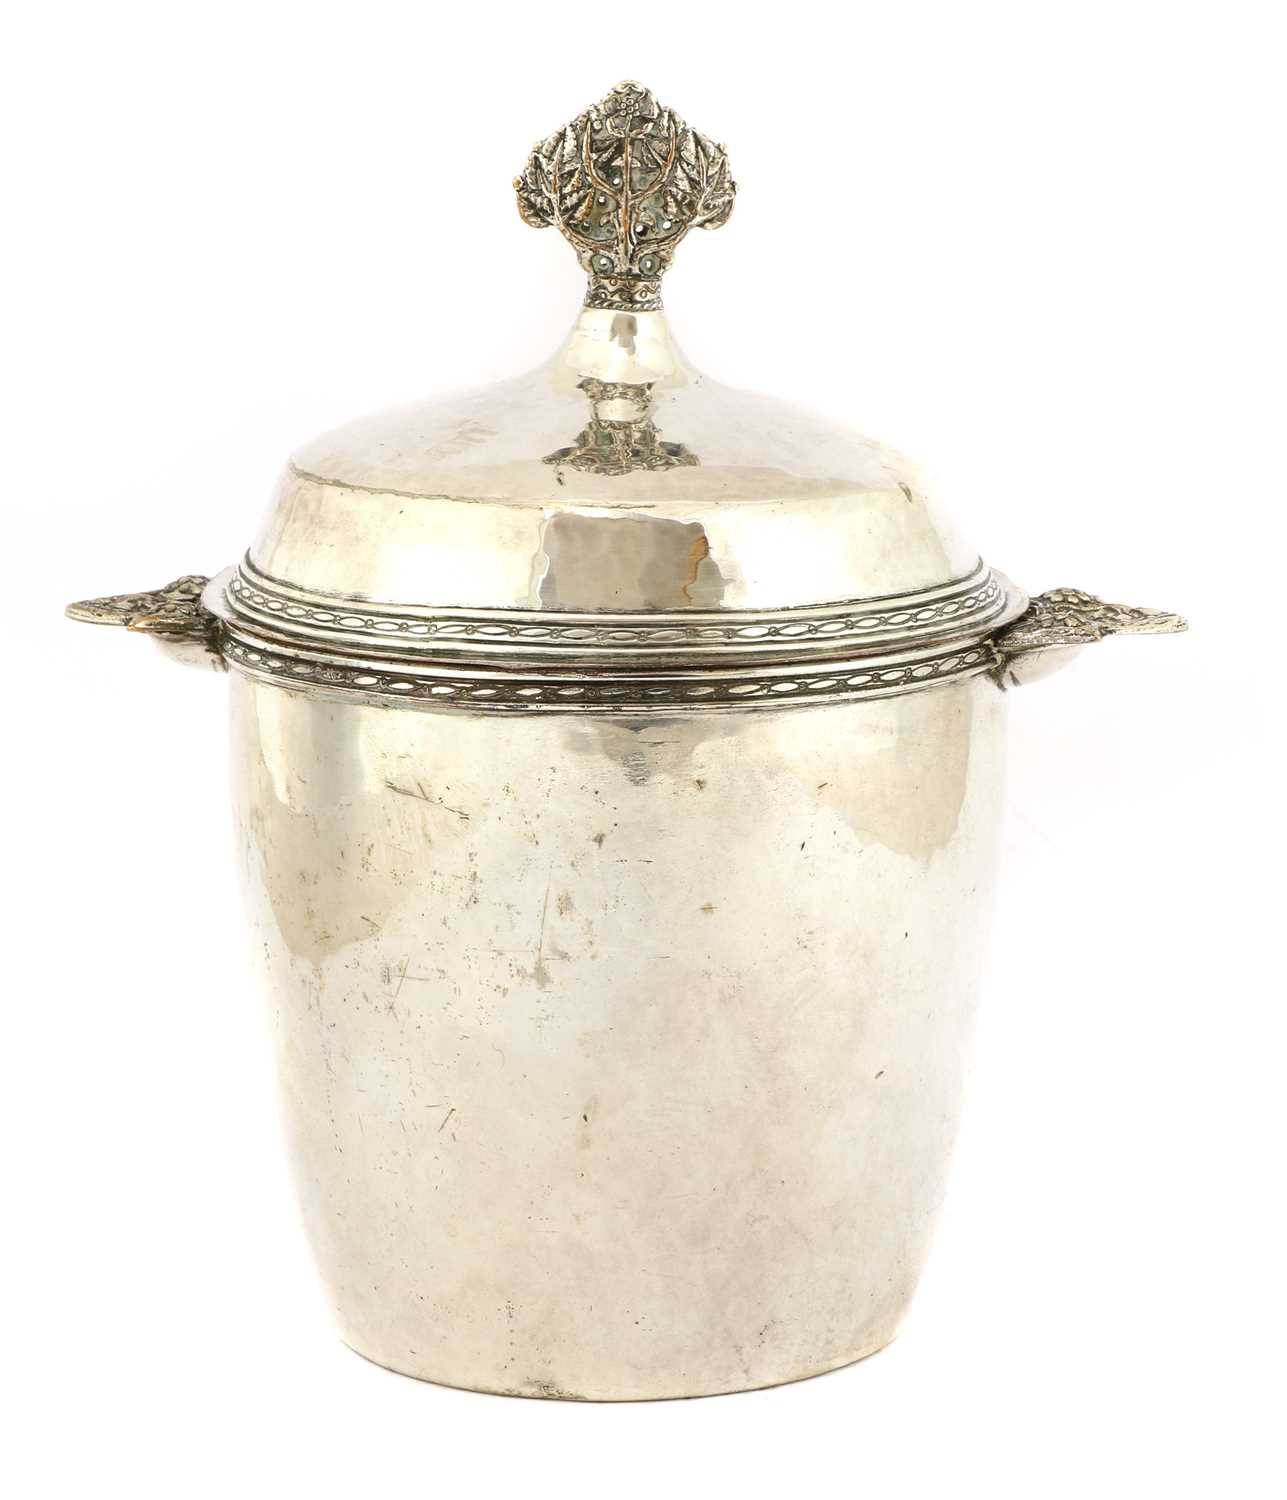 Lot 54 - An Arts and Crafts silver-plated tea caddy